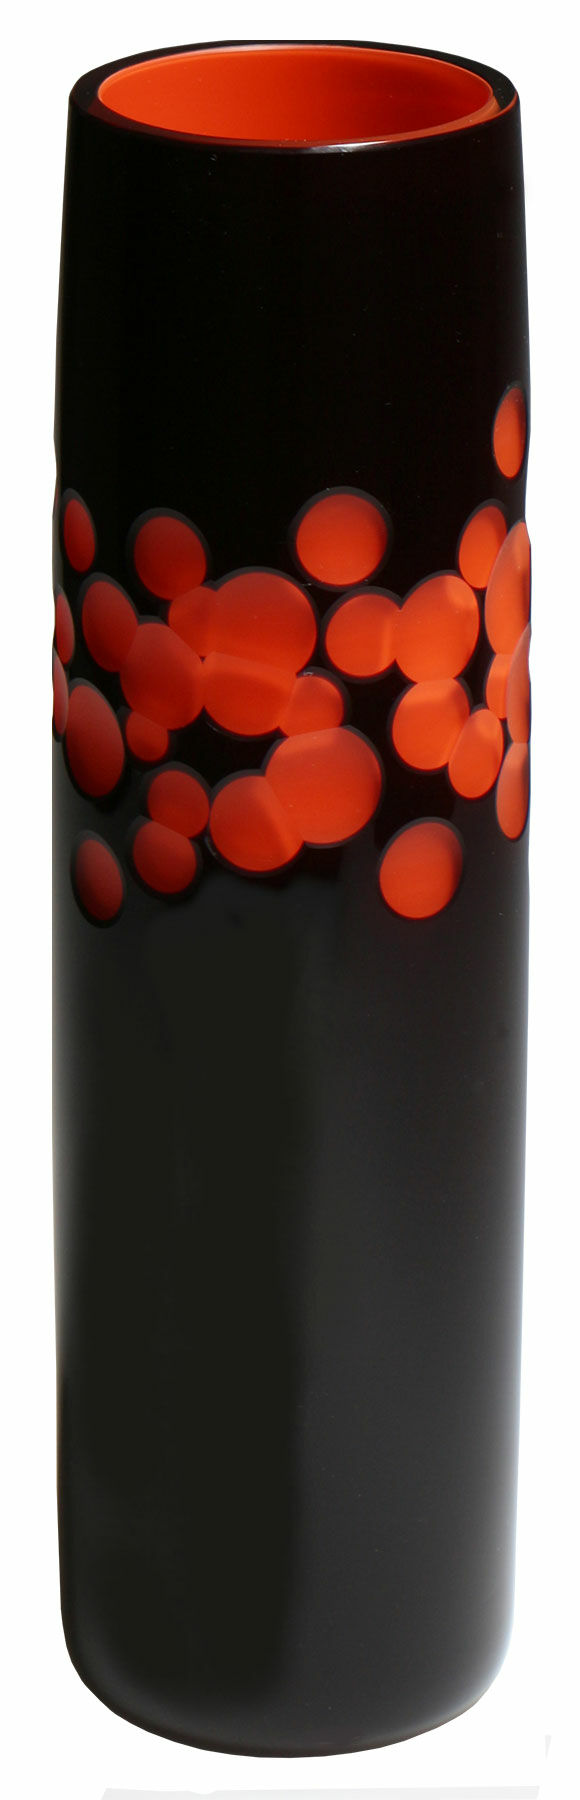 Glass vase "Red Bubbles" by Hans Wudy